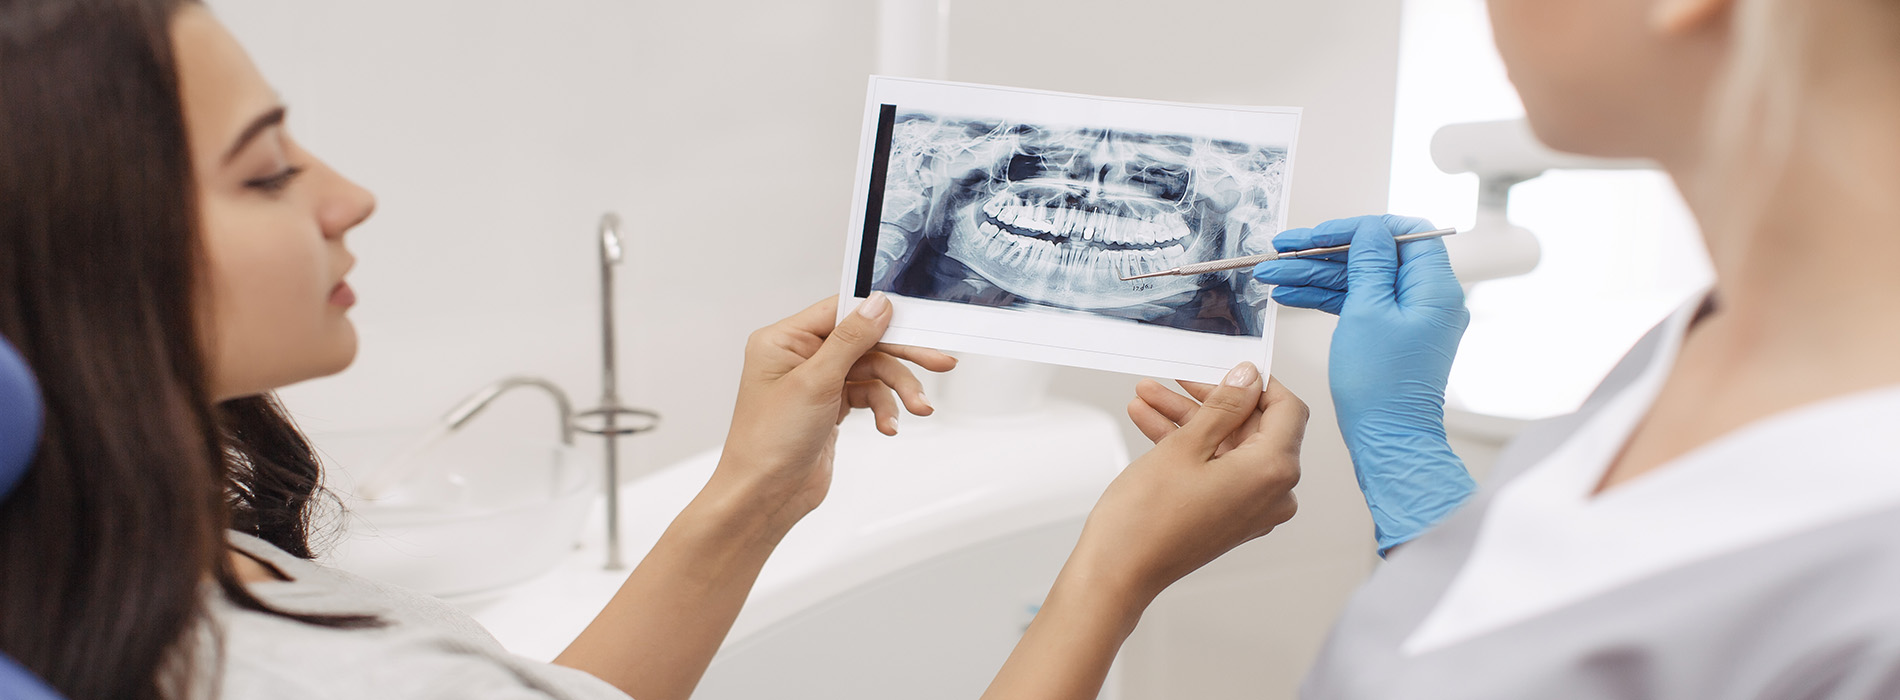 A dental professional showing a digital dental model to a patient, with a focus on oral health and dental technology.